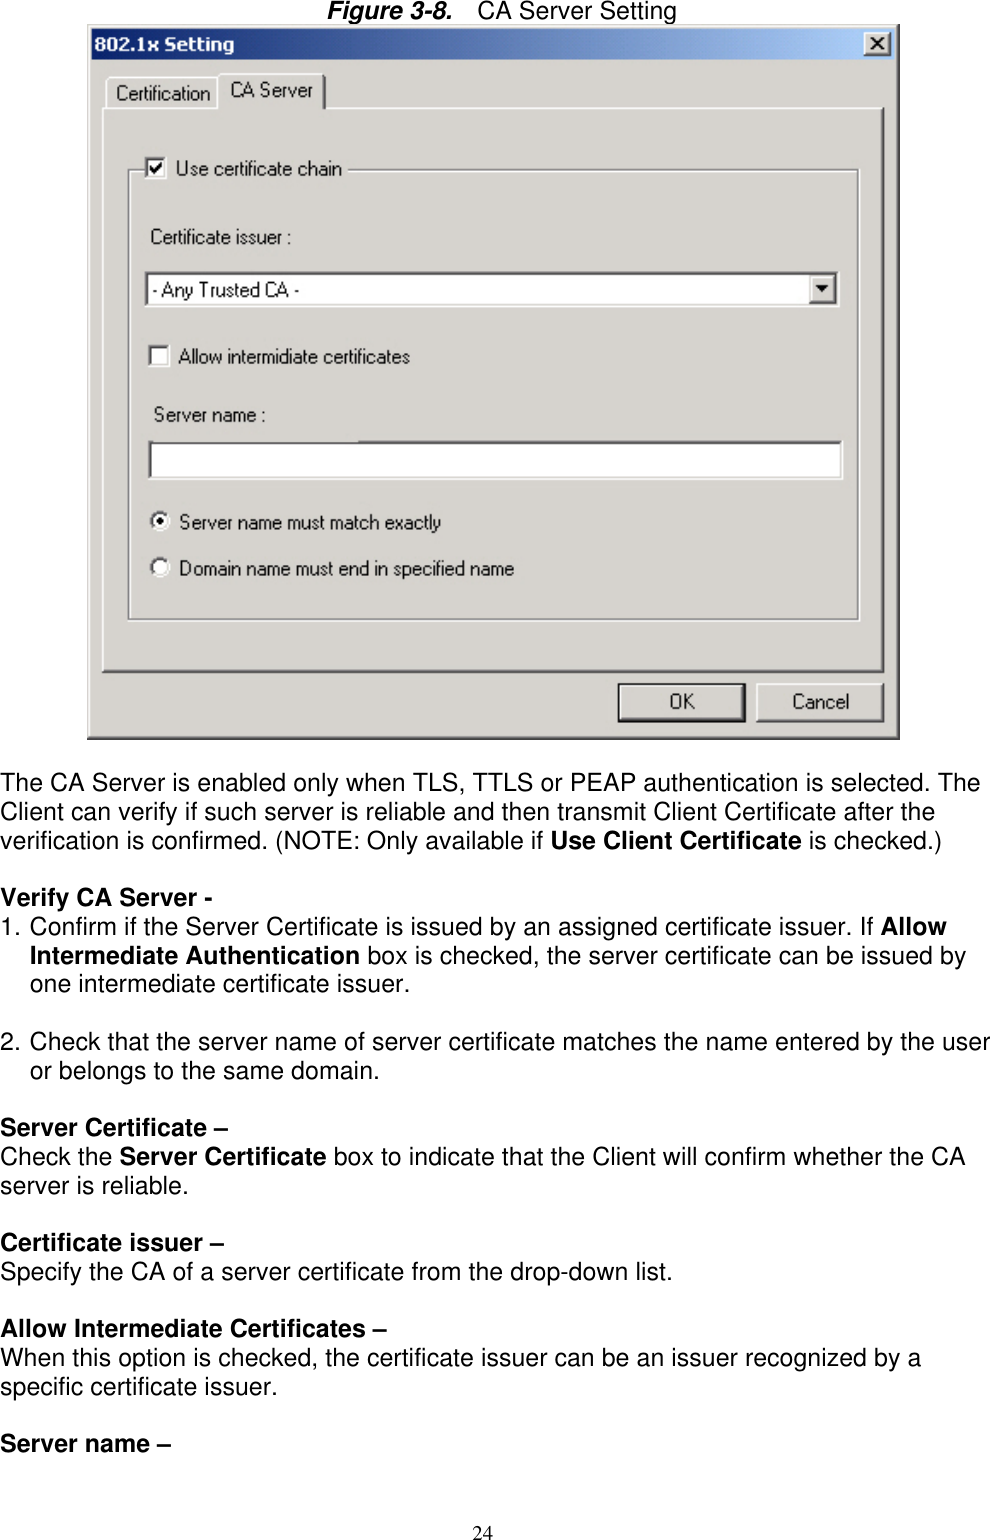 24     Figure 3-8.  CA Server Setting           The CA Server is enabled only when TLS, TTLS or PEAP authentication is selected. The Client can verify if such server is reliable and then transmit Client Certificate after the verification is confirmed. (NOTE: Only available if Use Client Certificate is checked.)  Verify CA Server -   1. Confirm if the Server Certificate is issued by an assigned certificate issuer. If Allow Intermediate Authentication box is checked, the server certificate can be issued by one intermediate certificate issuer.  2. Check that the server name of server certificate matches the name entered by the user or belongs to the same domain.  Server Certificate –   Check the Server Certificate box to indicate that the Client will confirm whether the CA server is reliable.  Certificate issuer –   Specify the CA of a server certificate from the drop-down list.  Allow Intermediate Certificates –   When this option is checked, the certificate issuer can be an issuer recognized by a specific certificate issuer.    Server name –   